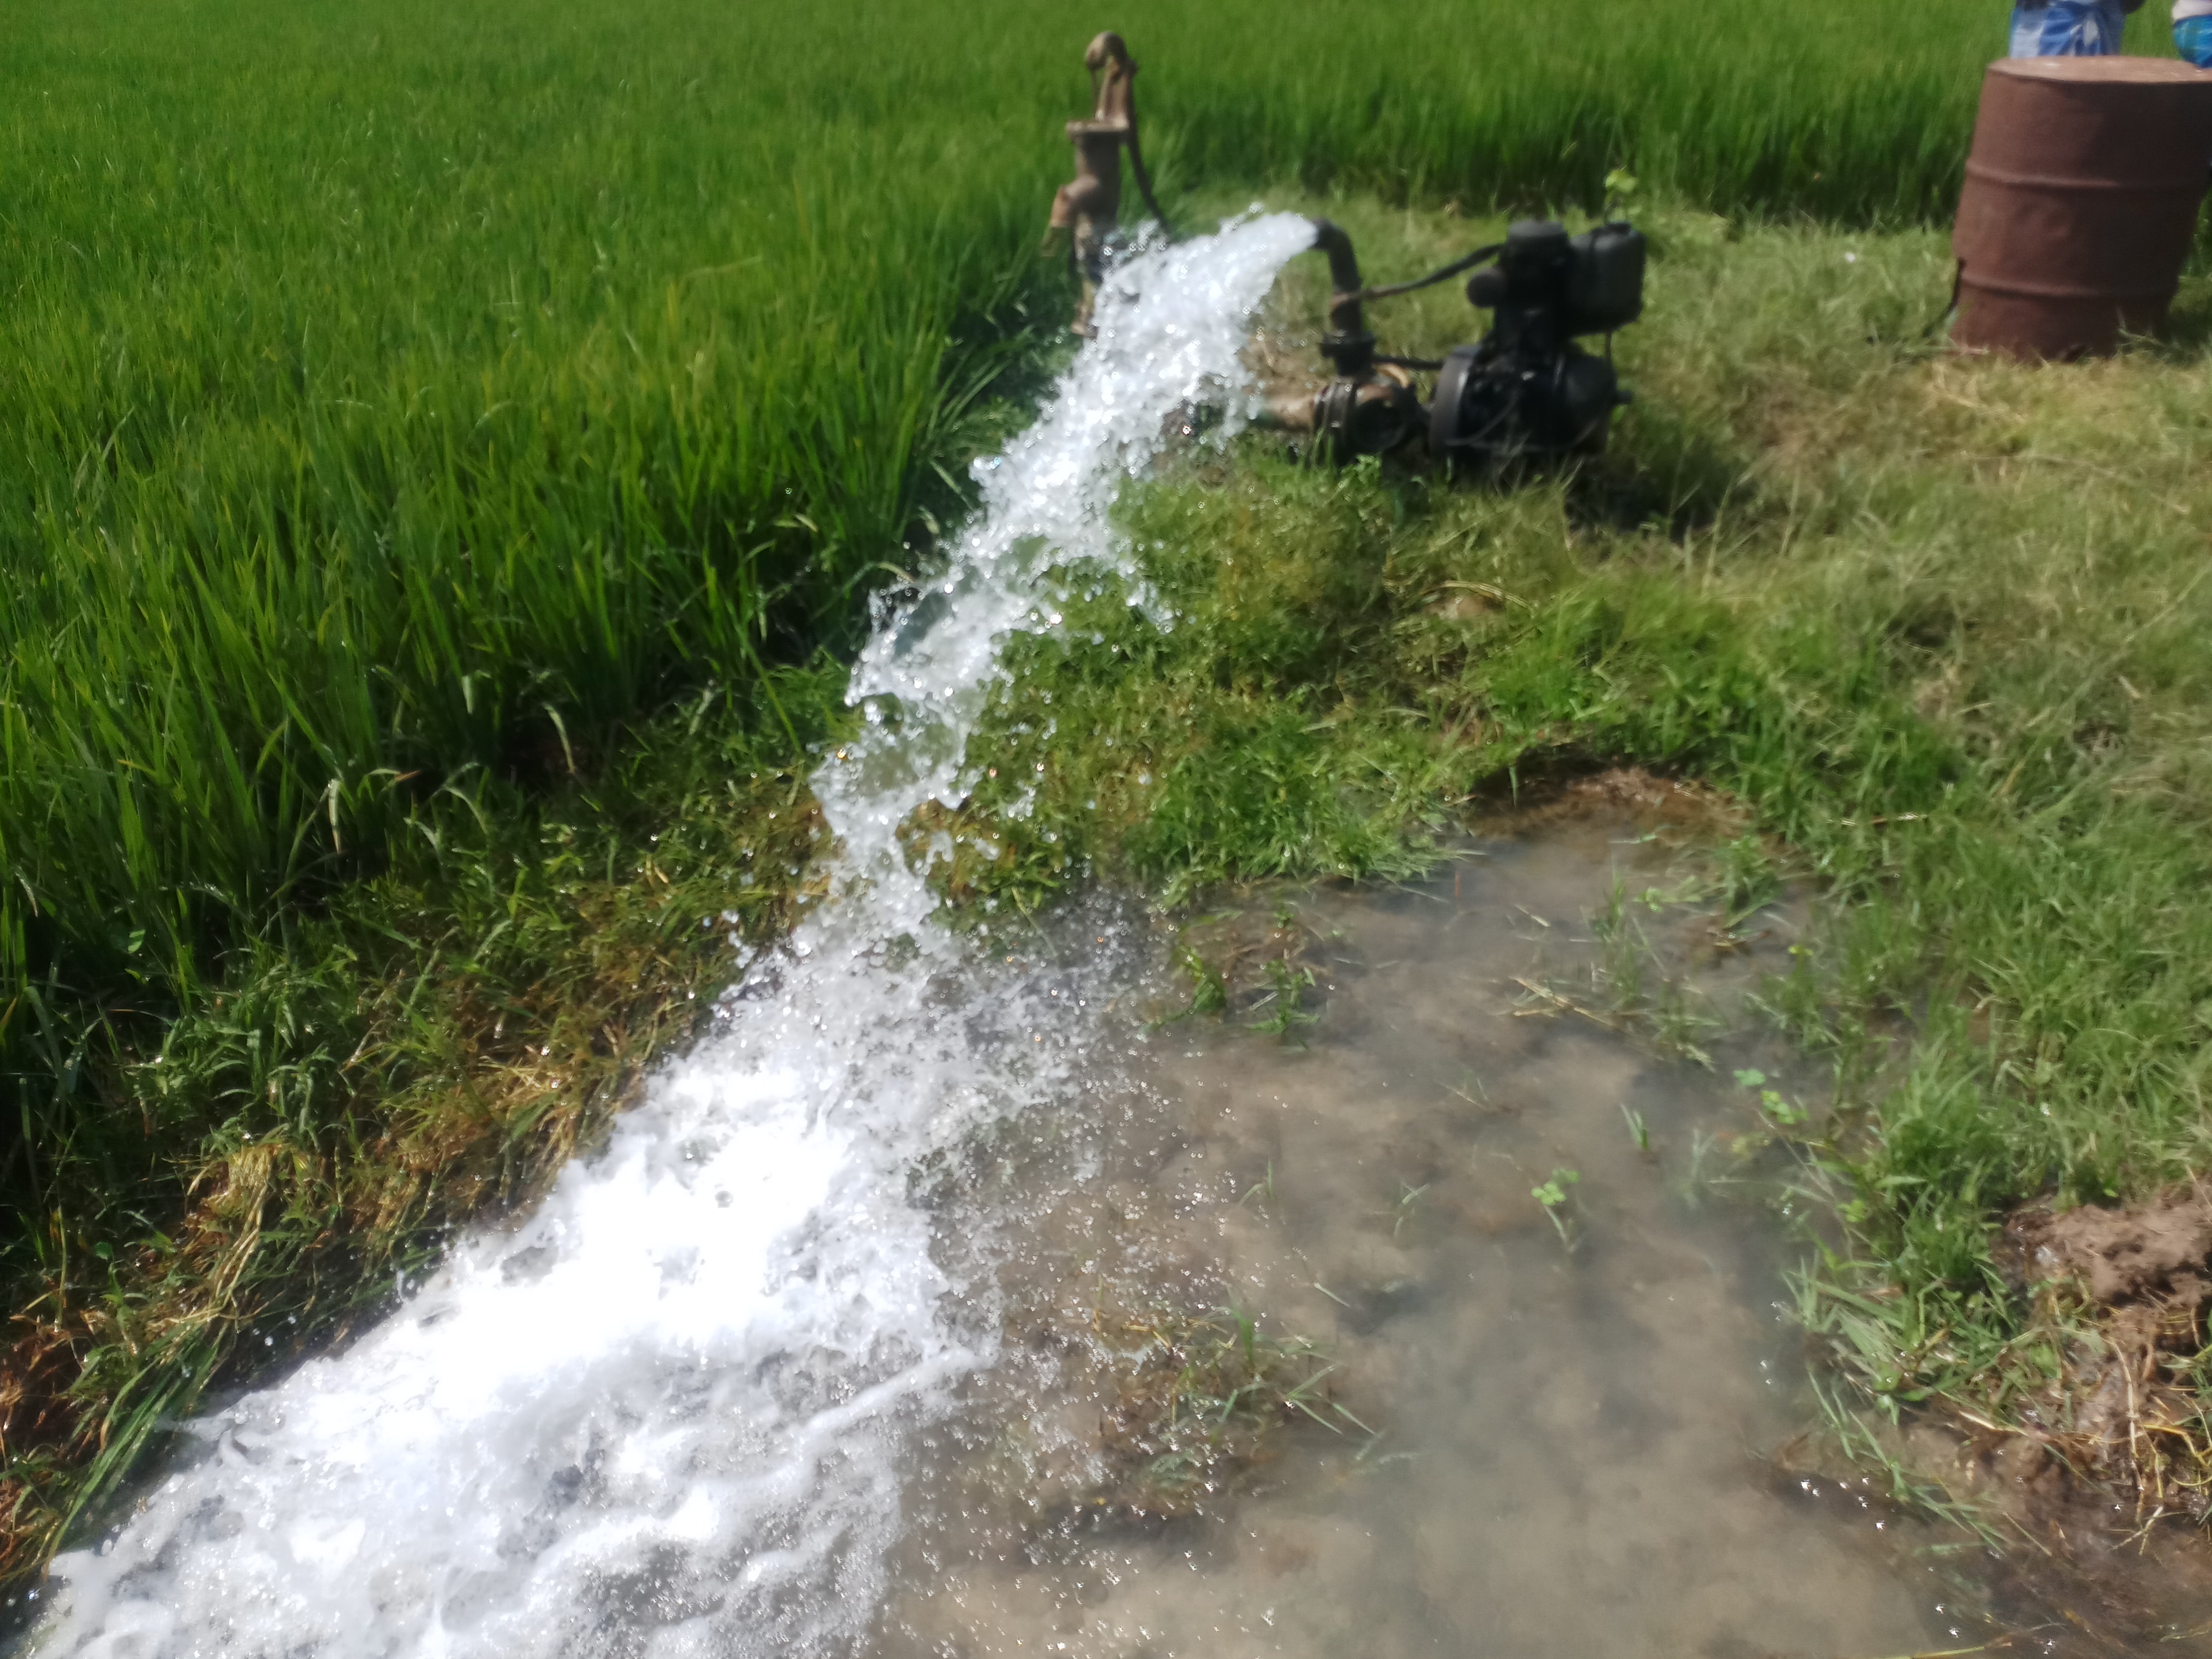 One of the diesel water pumps farmers depend on to irrigate their fields. (Photo: Gurvinder Singh)